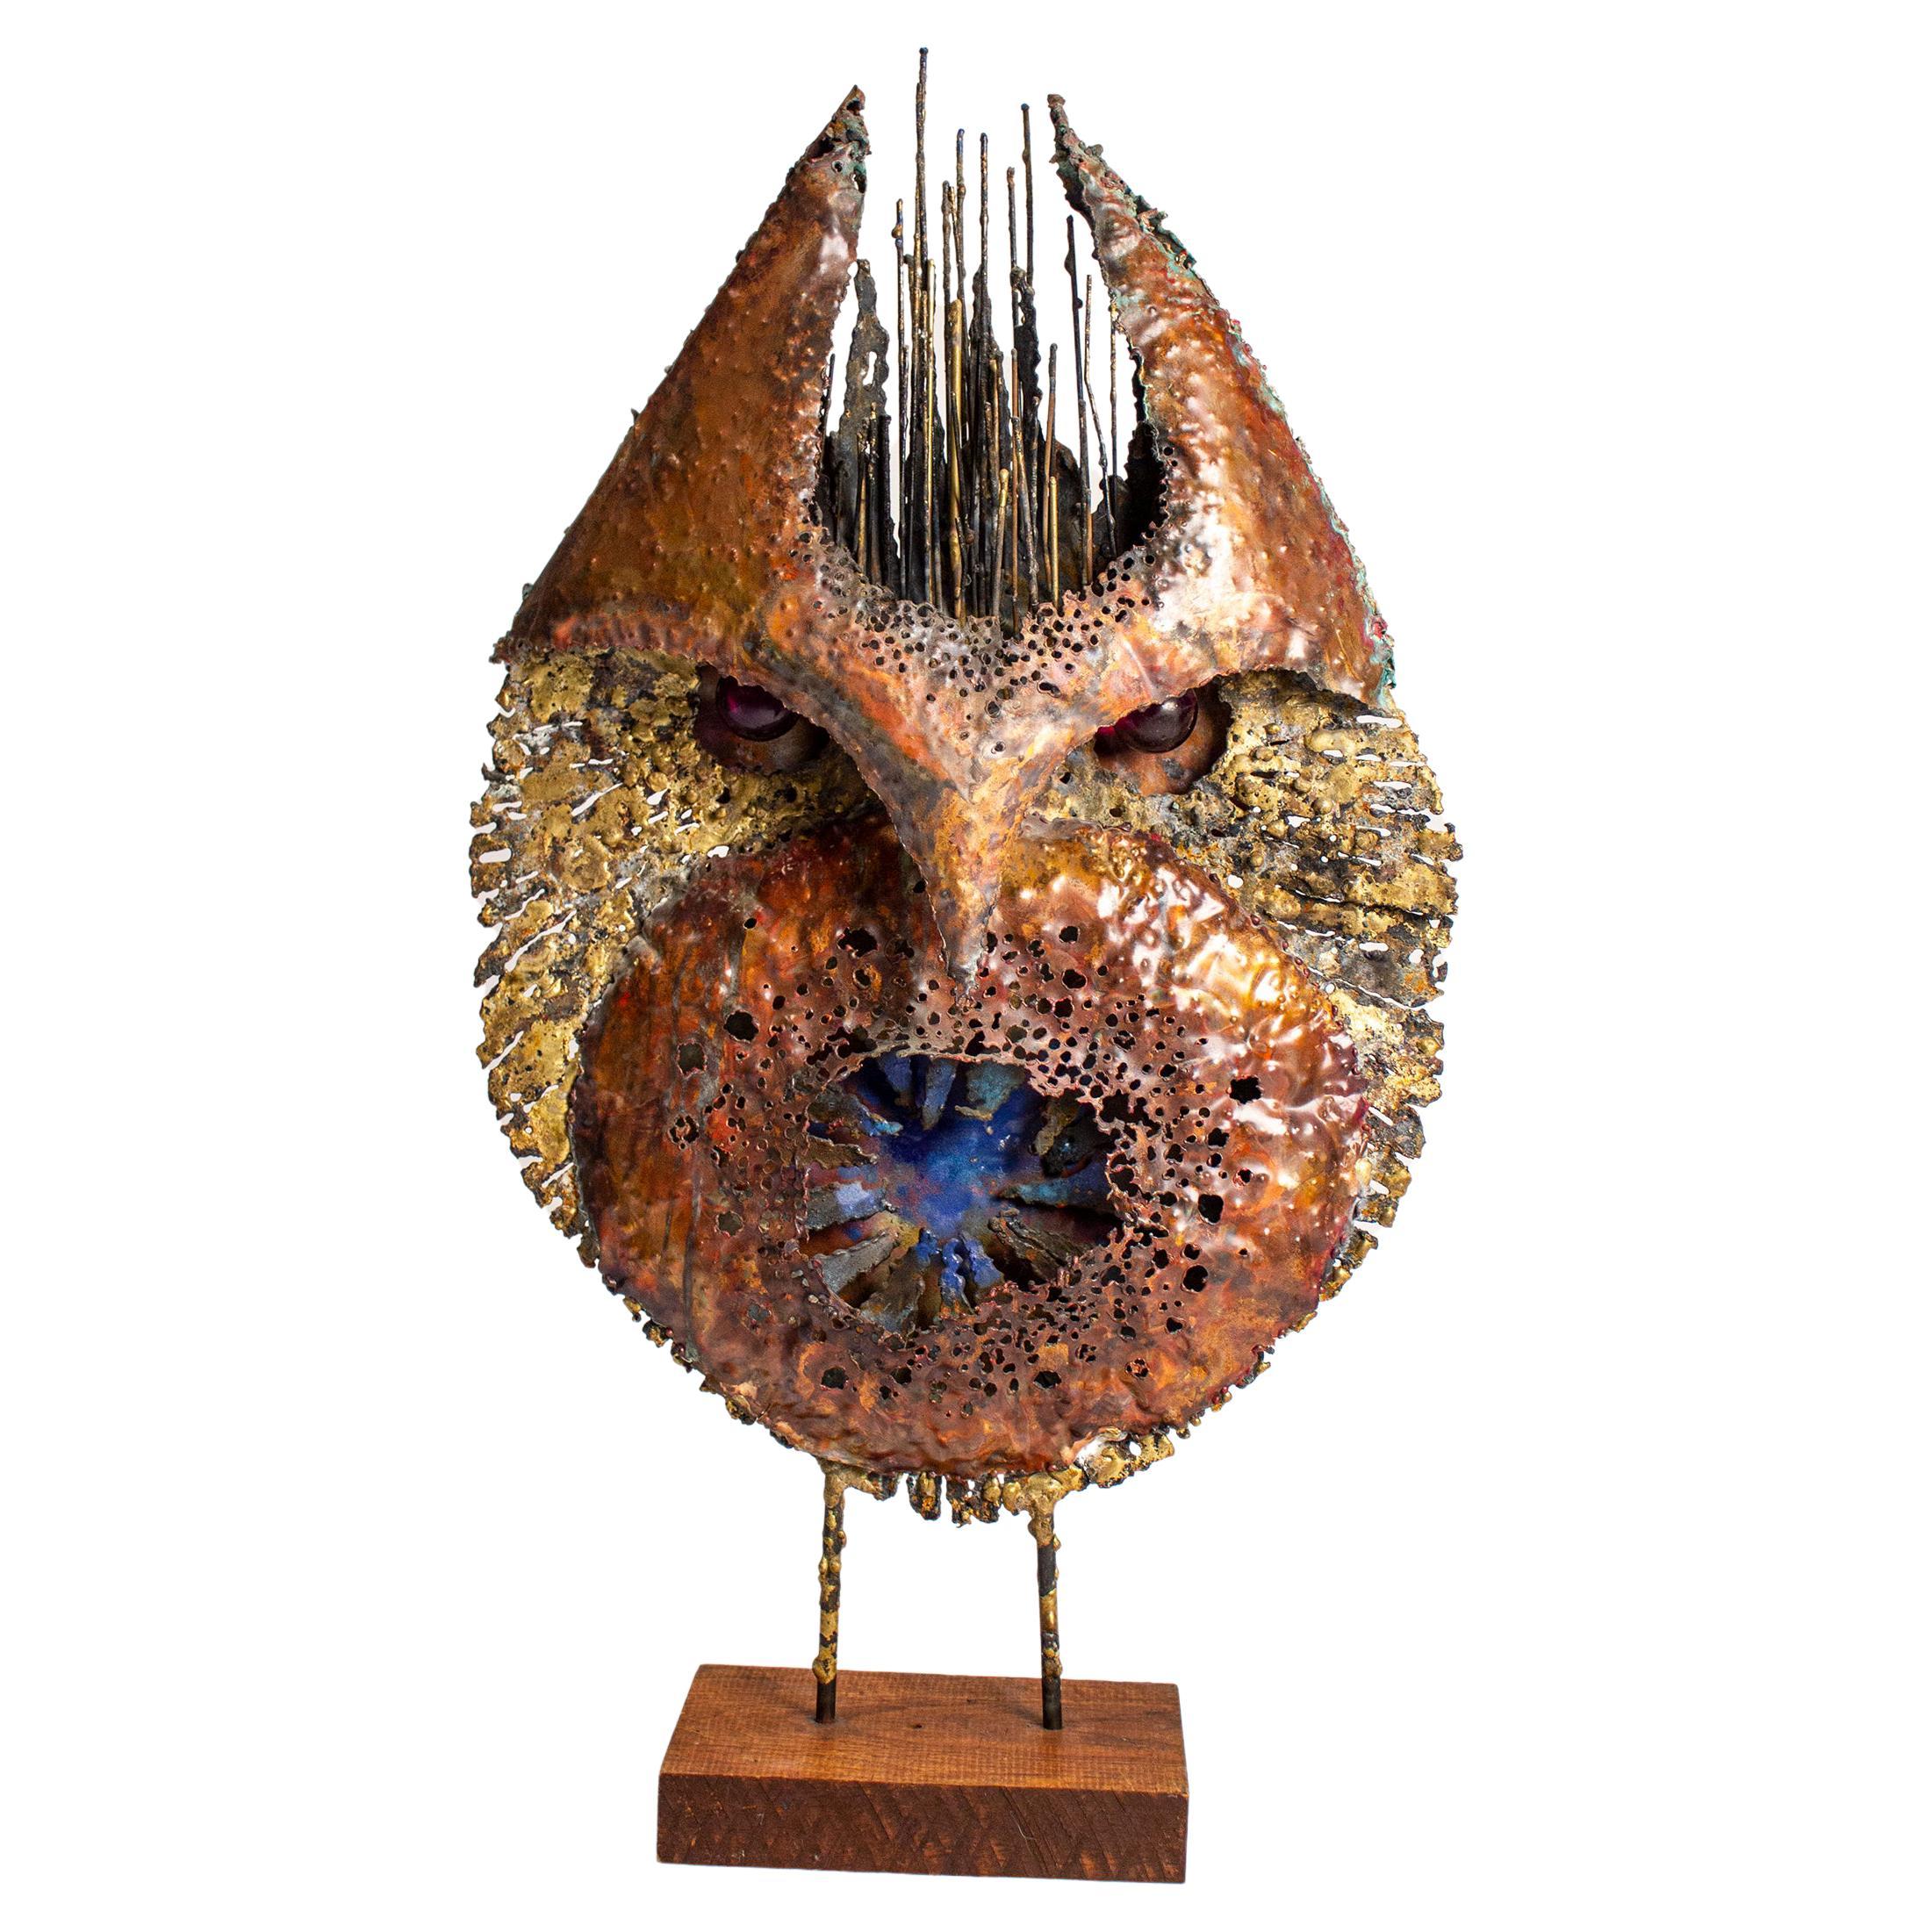 James Bearden Large Scale Brutalist Owl Sculpture from His "Animal Series" For Sale